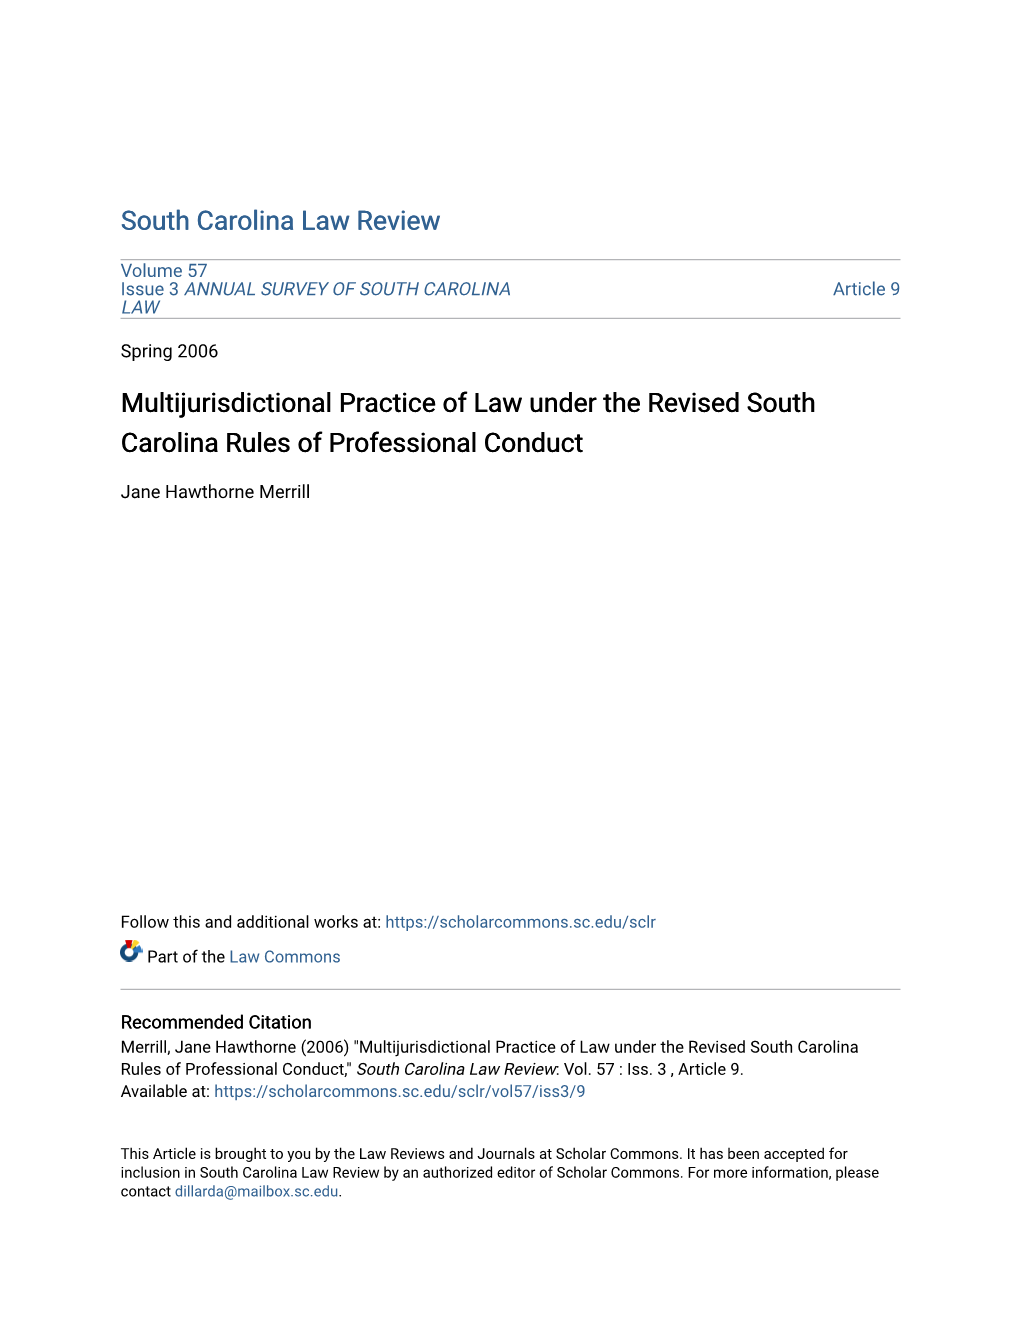 Multijurisdictional Practice of Law Under the Revised South Carolina Rules of Professional Conduct